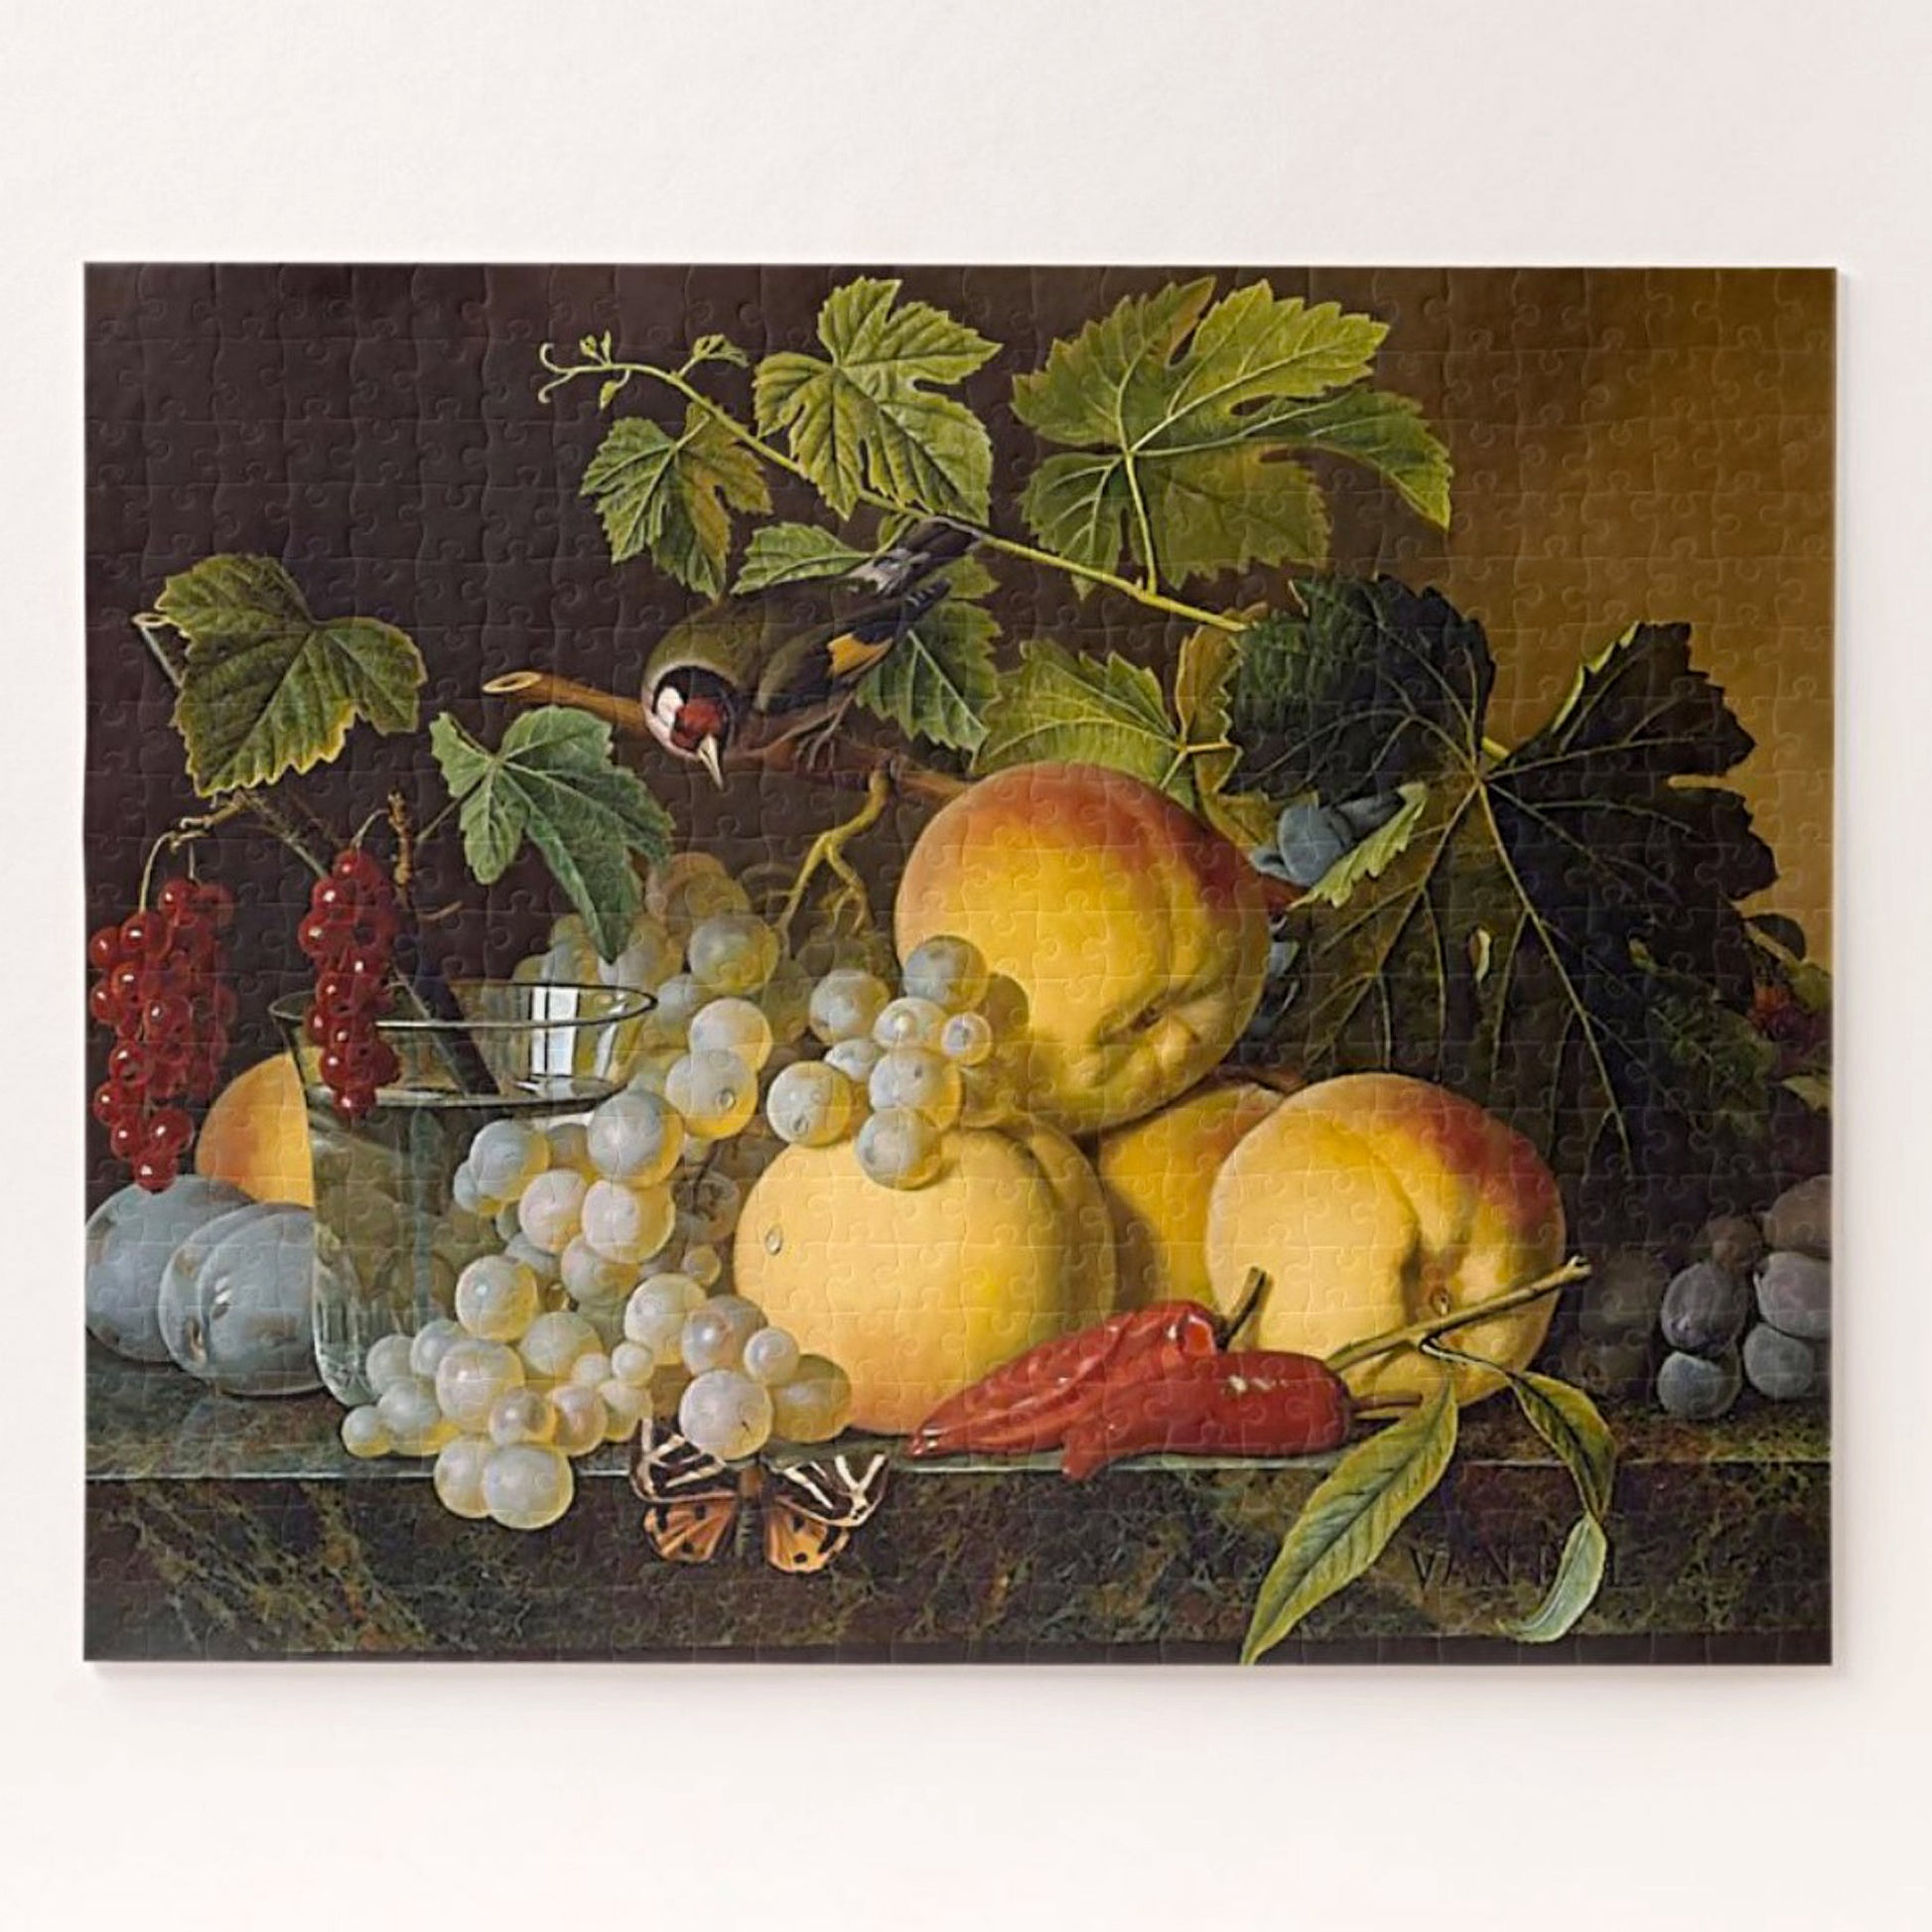 Fruit still life art puzzle for adults